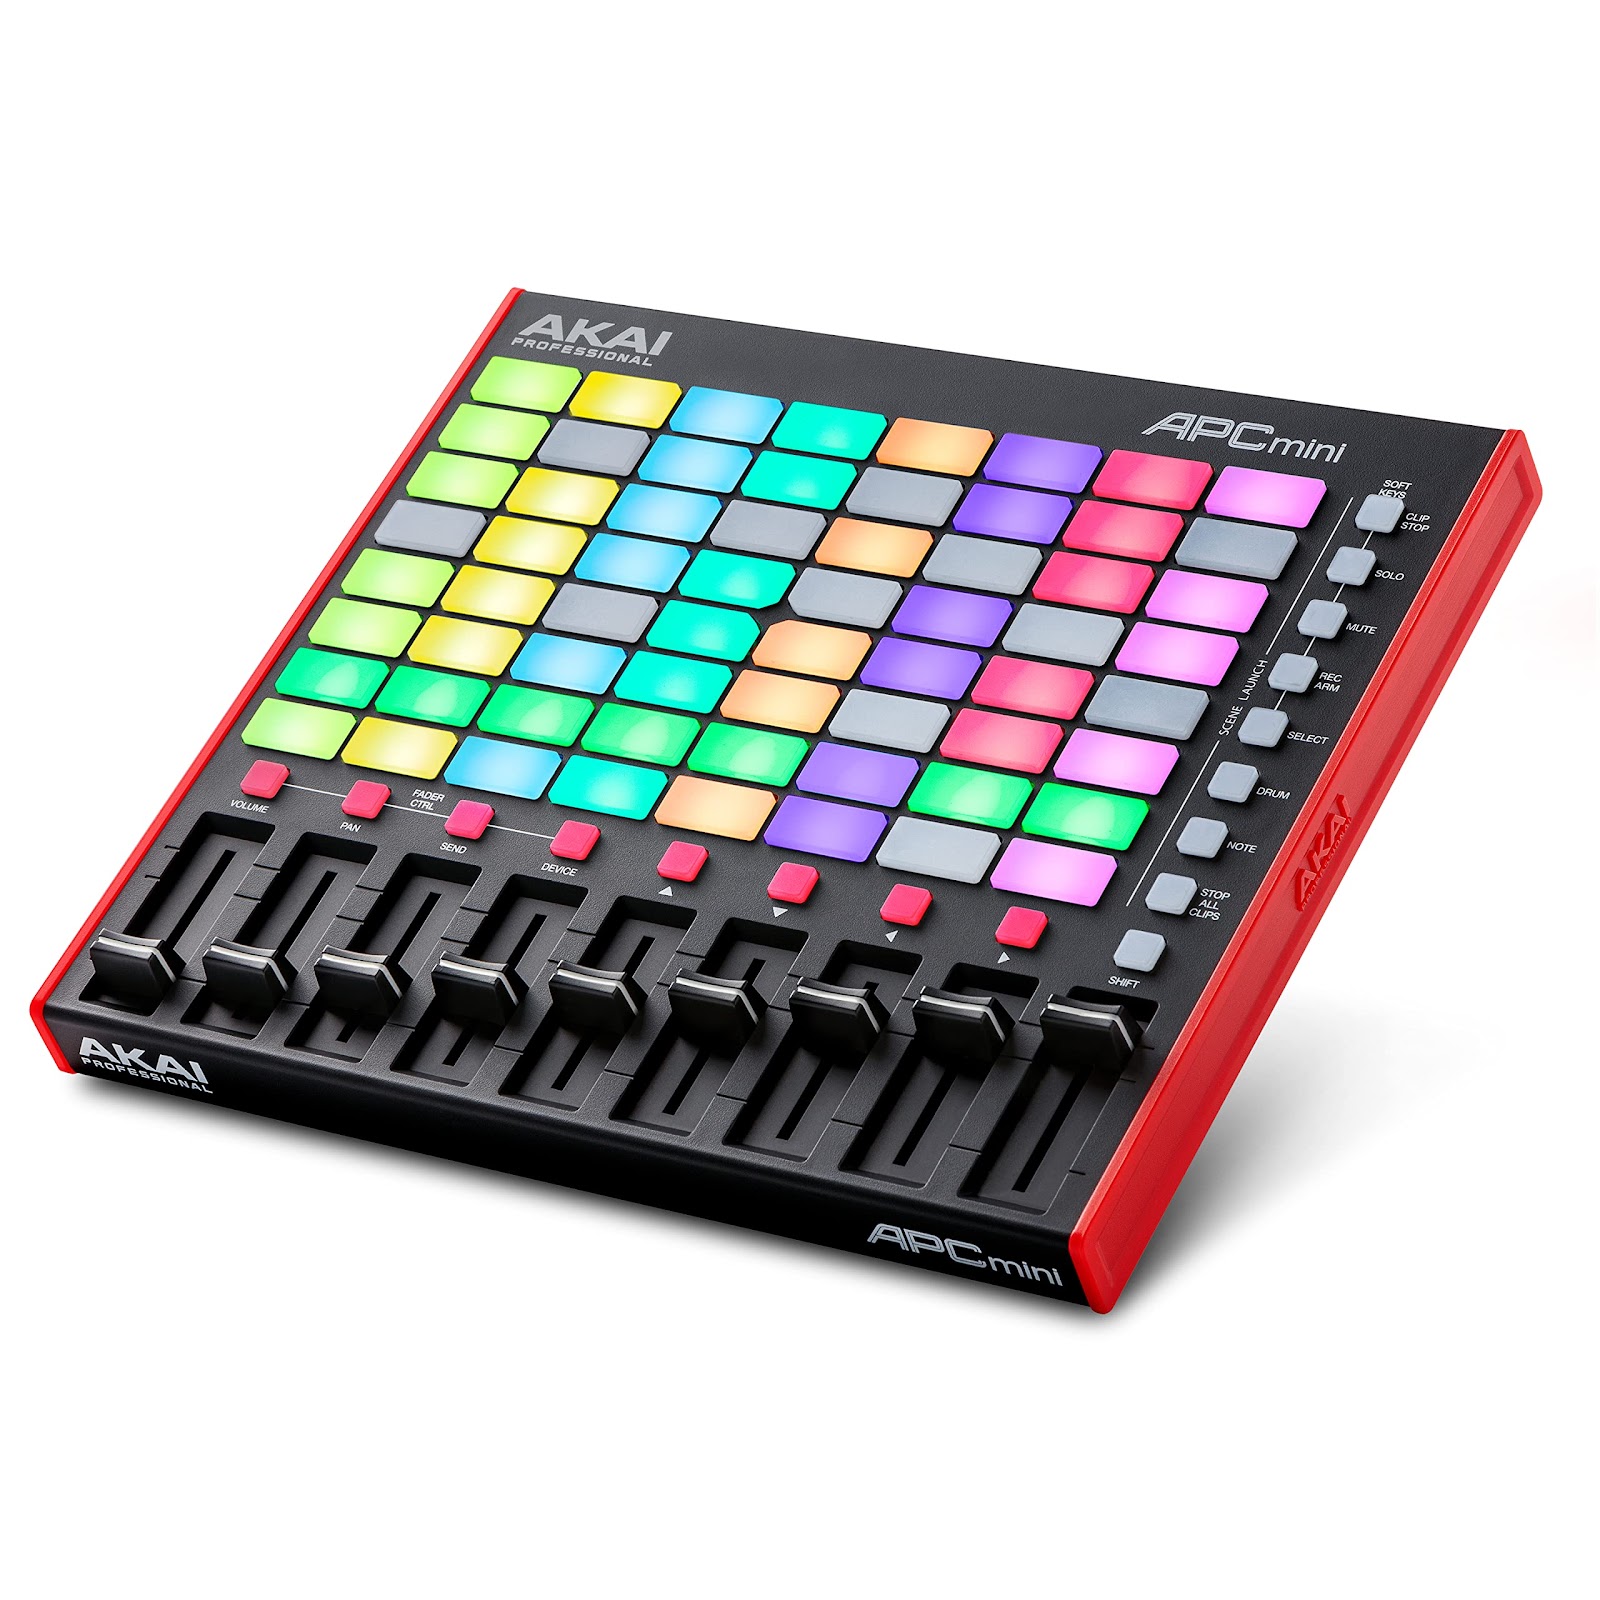 The MIDI Controller That Fits In Your Pocket!